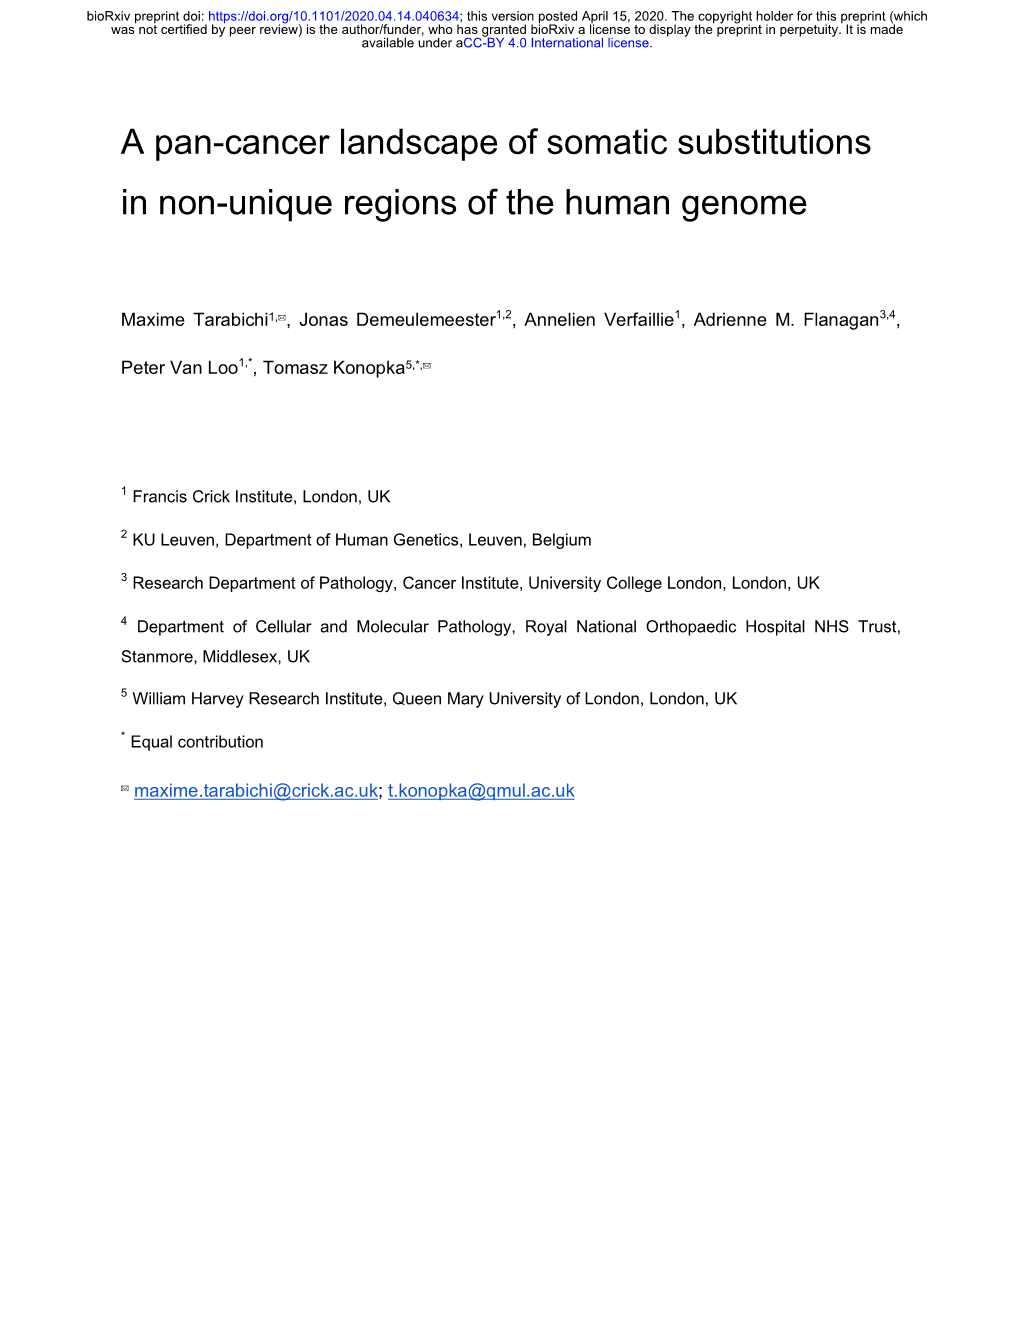 A Pan-Cancer Landscape of Somatic Substitutions in Non-Unique Regions of the Human Genome